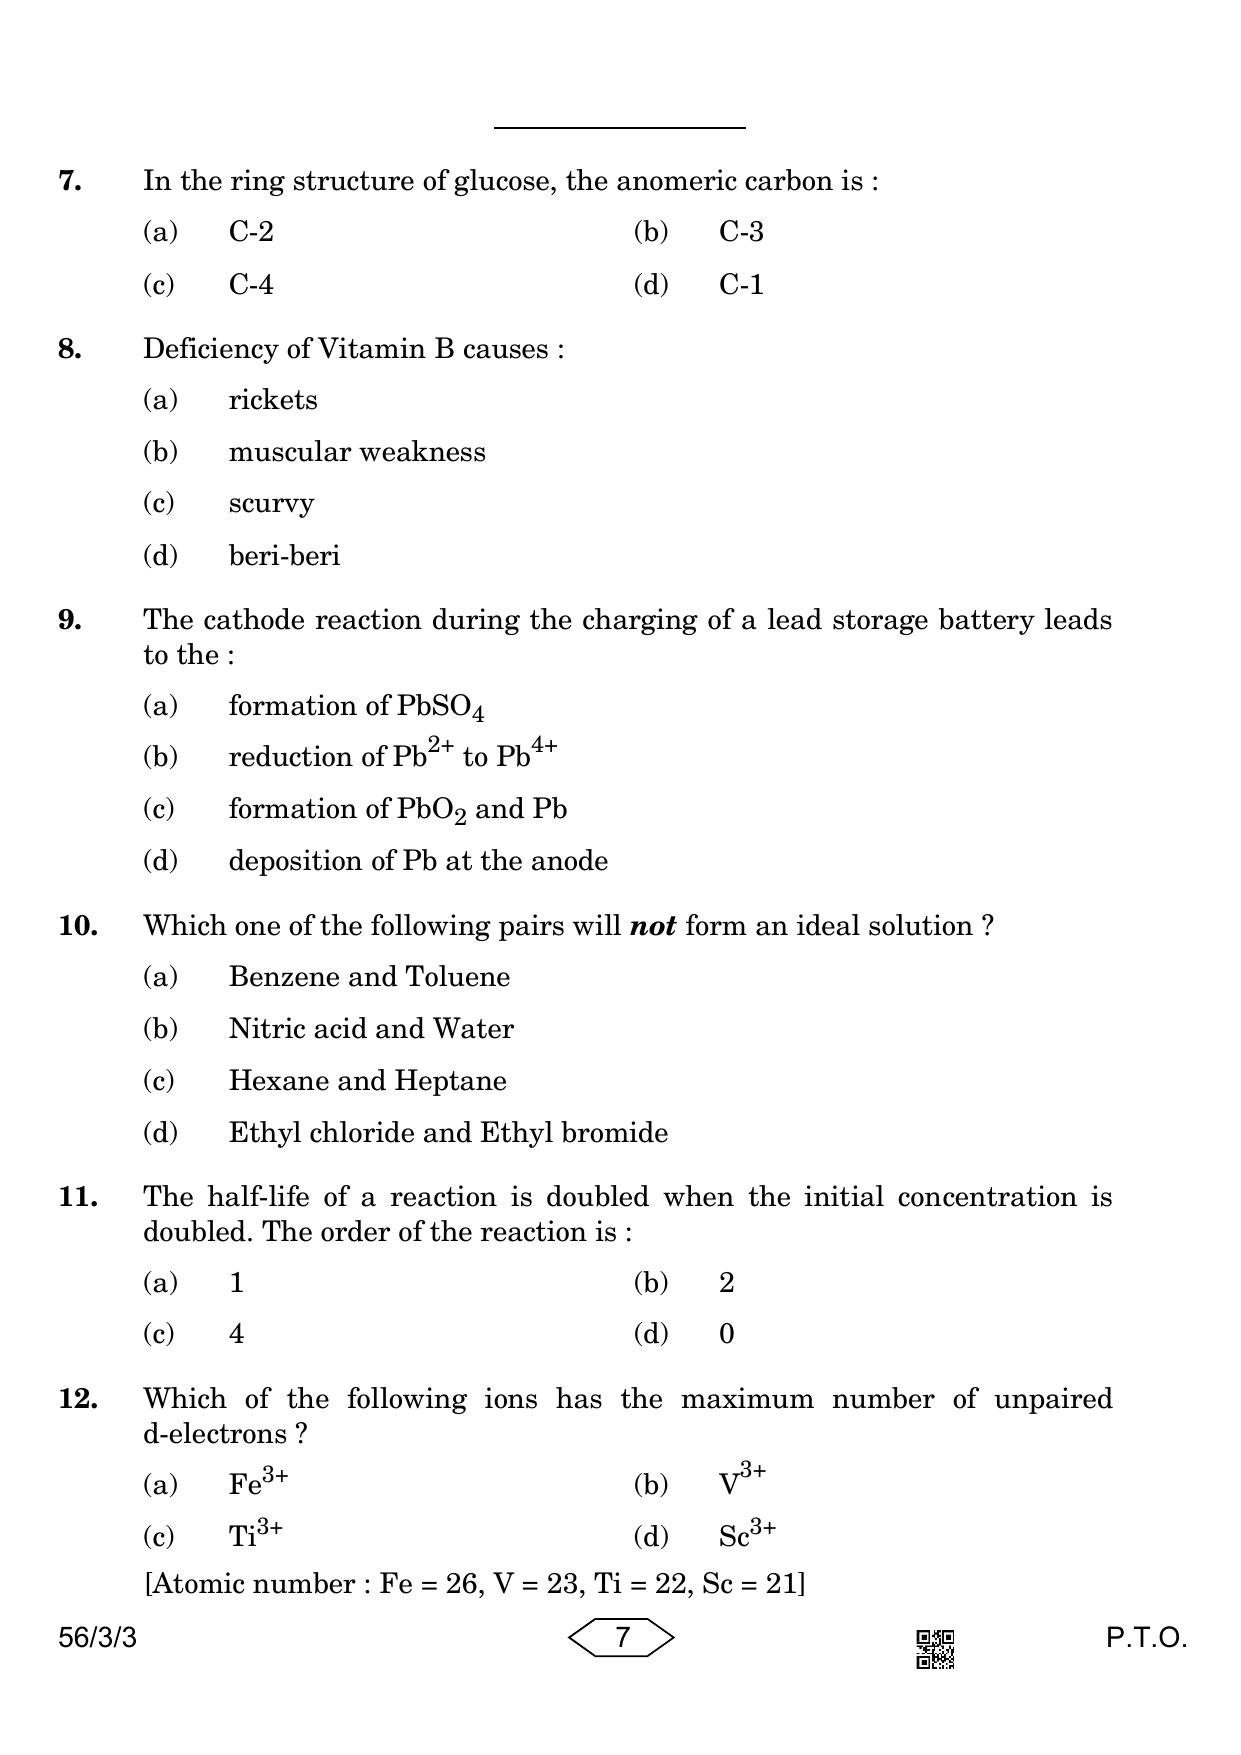 CBSE Class 12 56-3-3 Chemistry 2023 Question Paper - Page 7